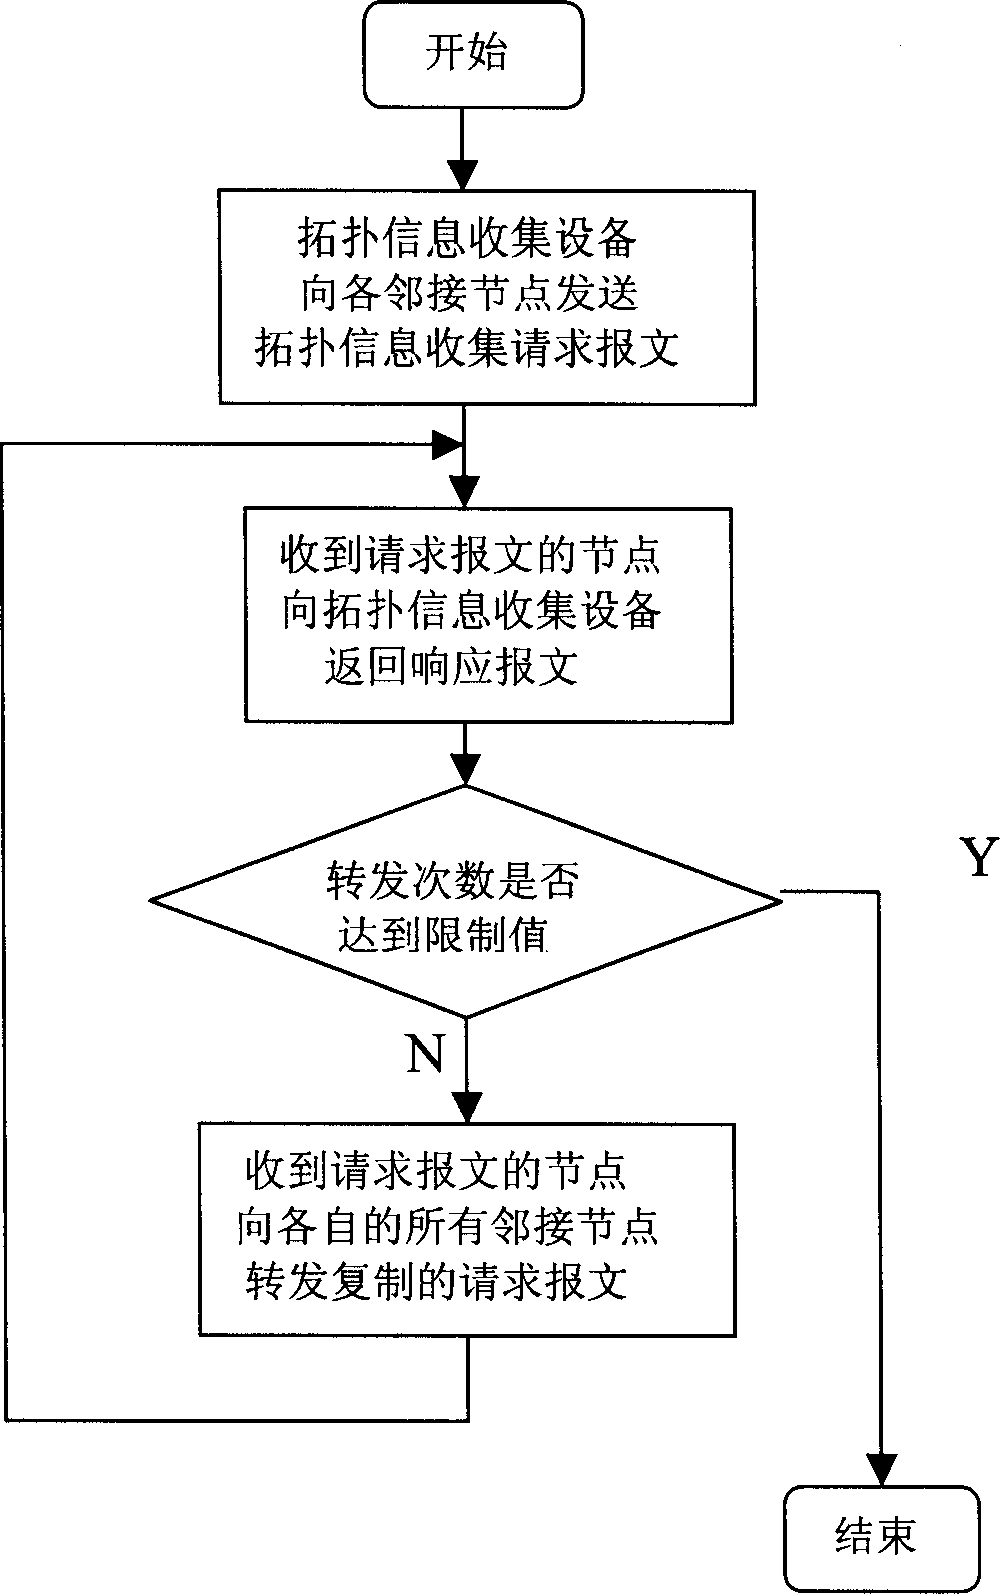 Network topology information acquisition method